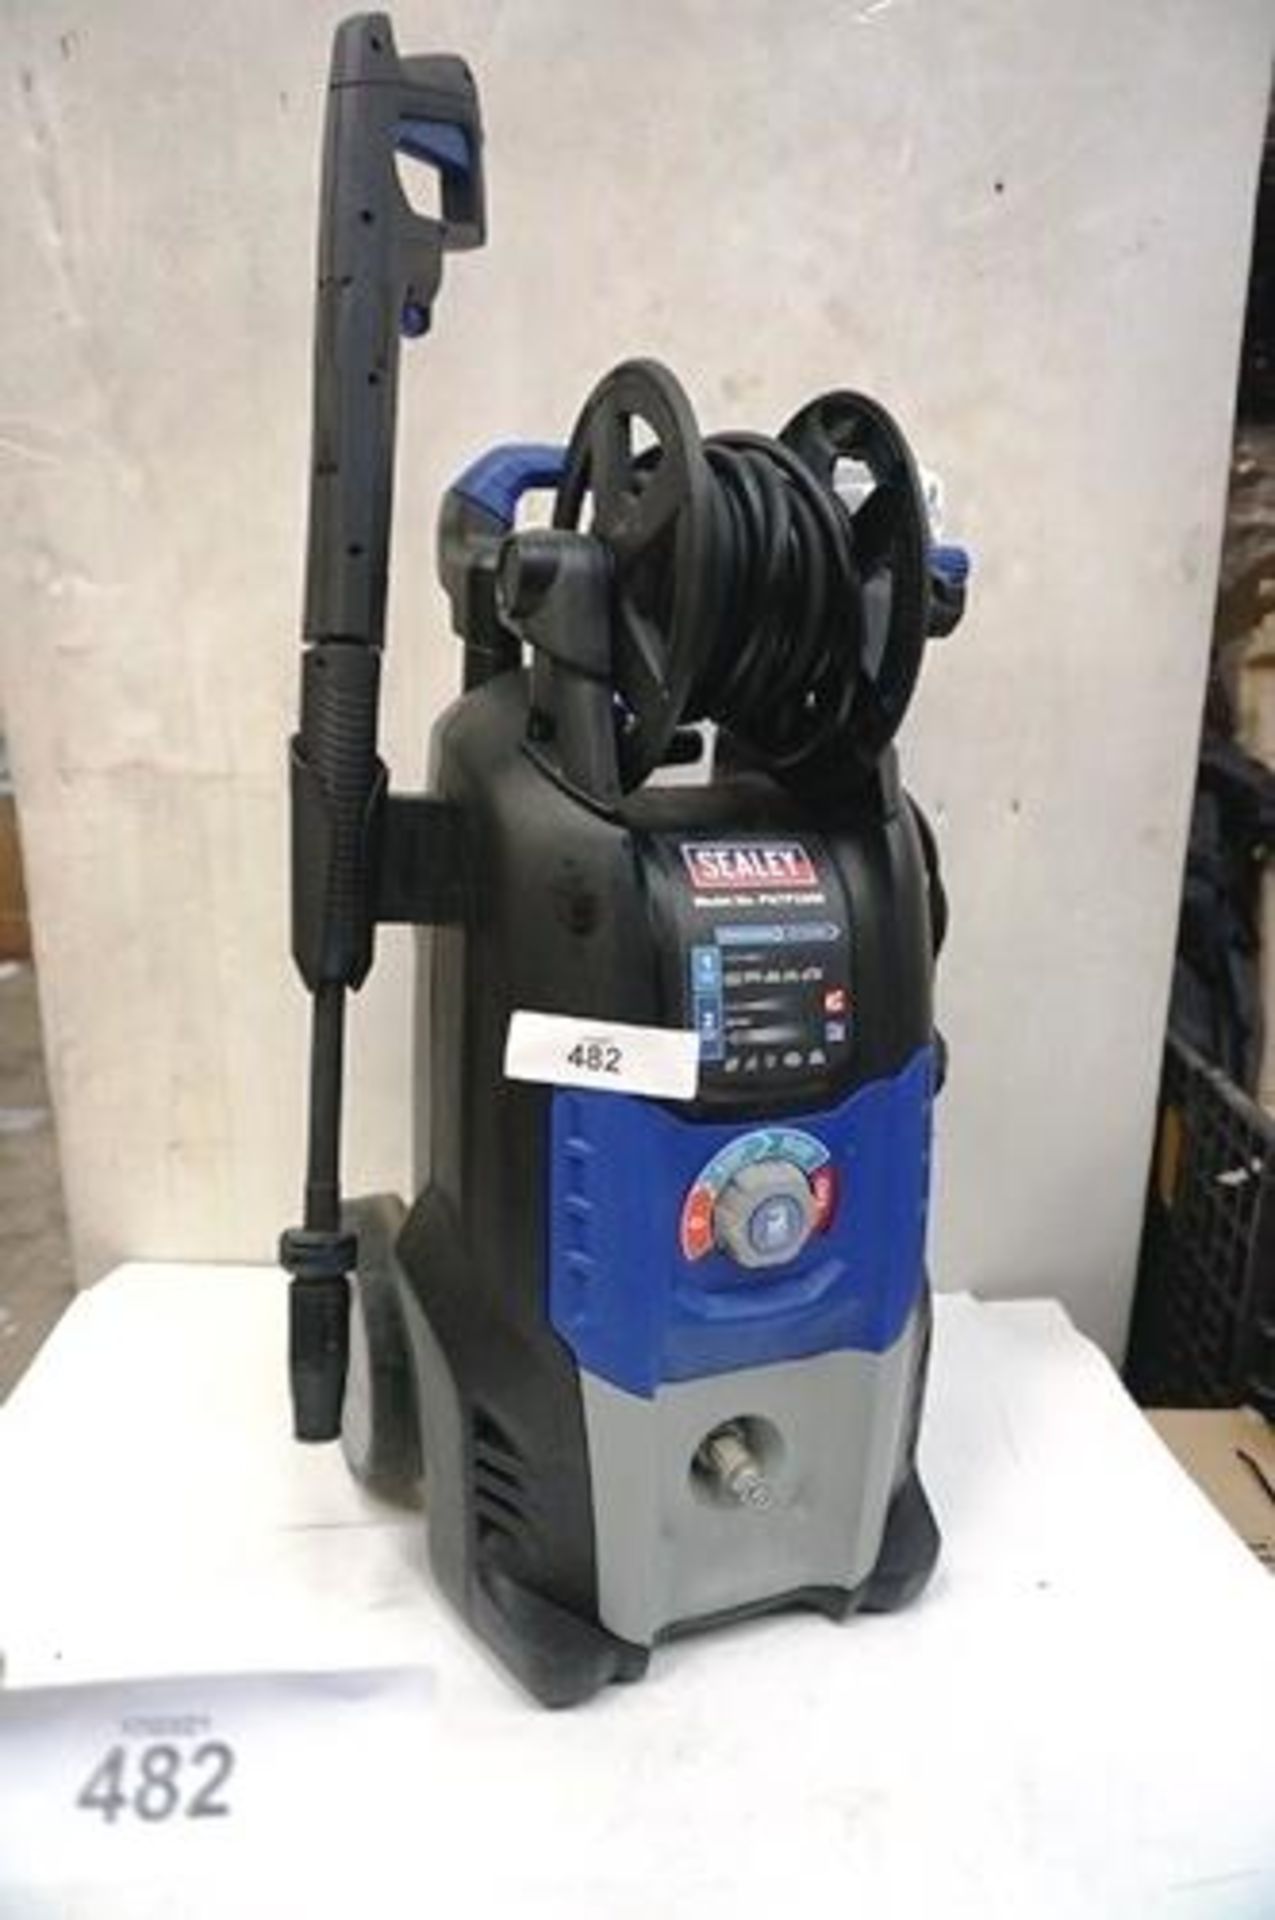 Sealey PWTF2200 electric pressure washer - Second-hand, powers on, not fully tested (GS38)